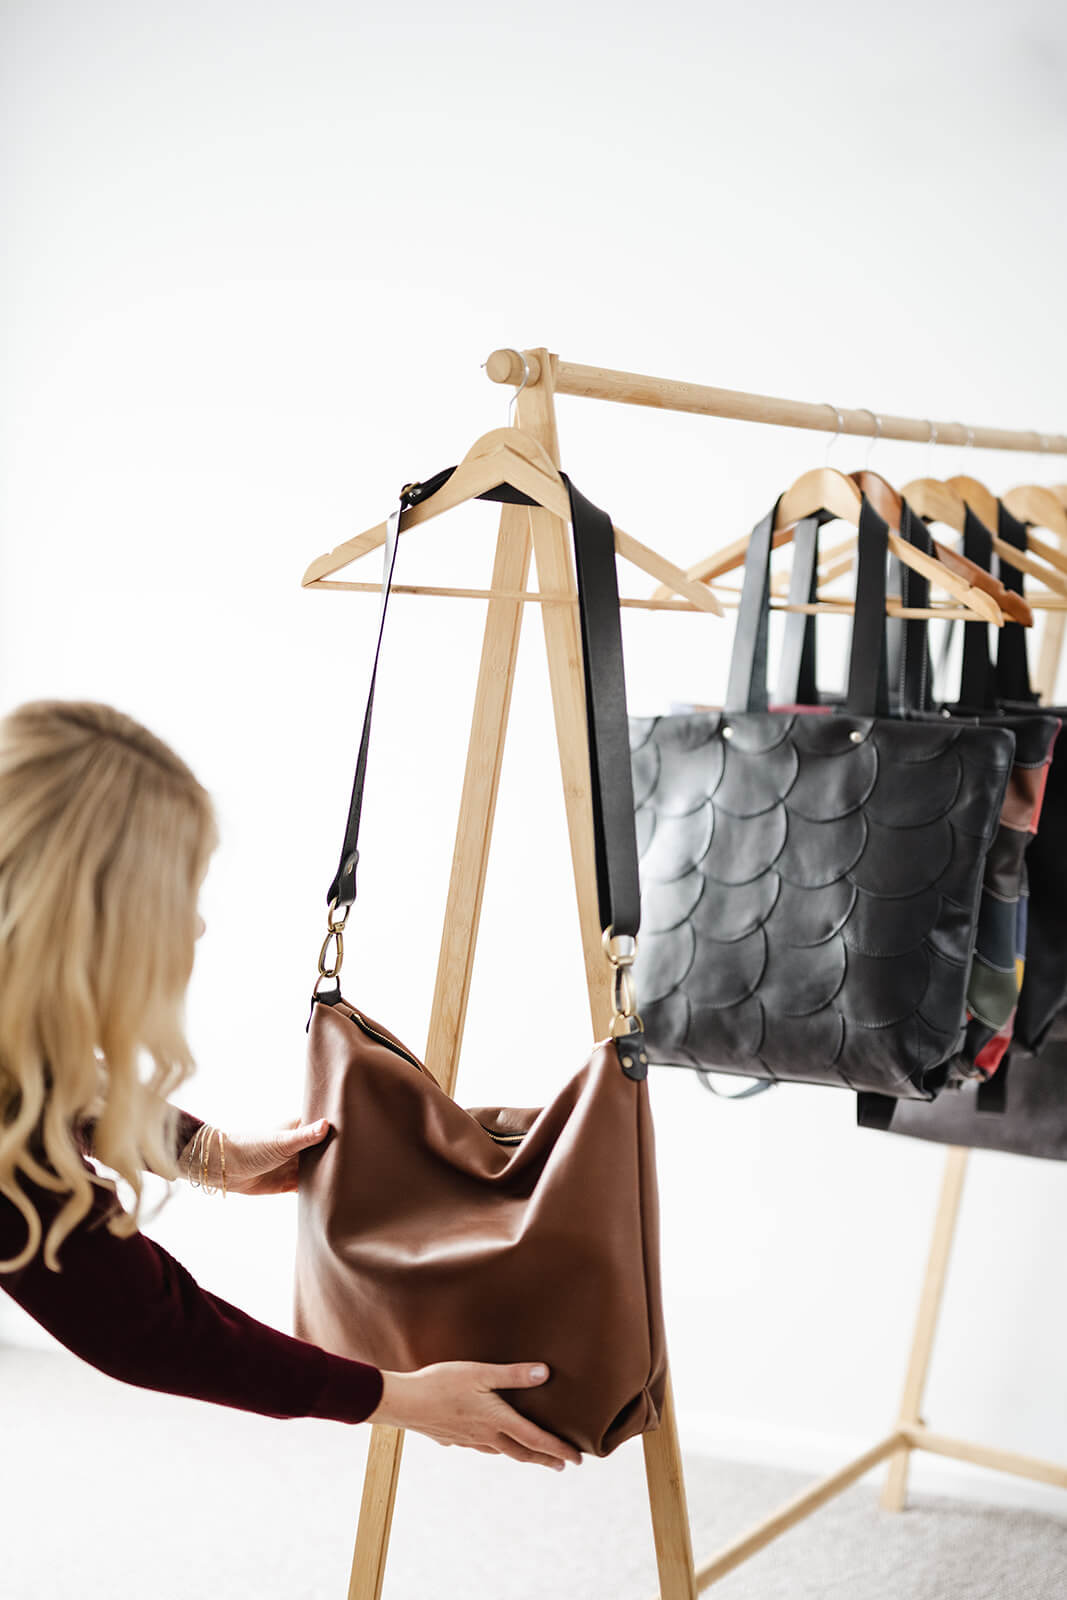 Blonde woman adjusting tan leather bag hanging on a timber rack of leather bags. The bag being adjusted is the Ella Jackson Tan Leather Carryall.